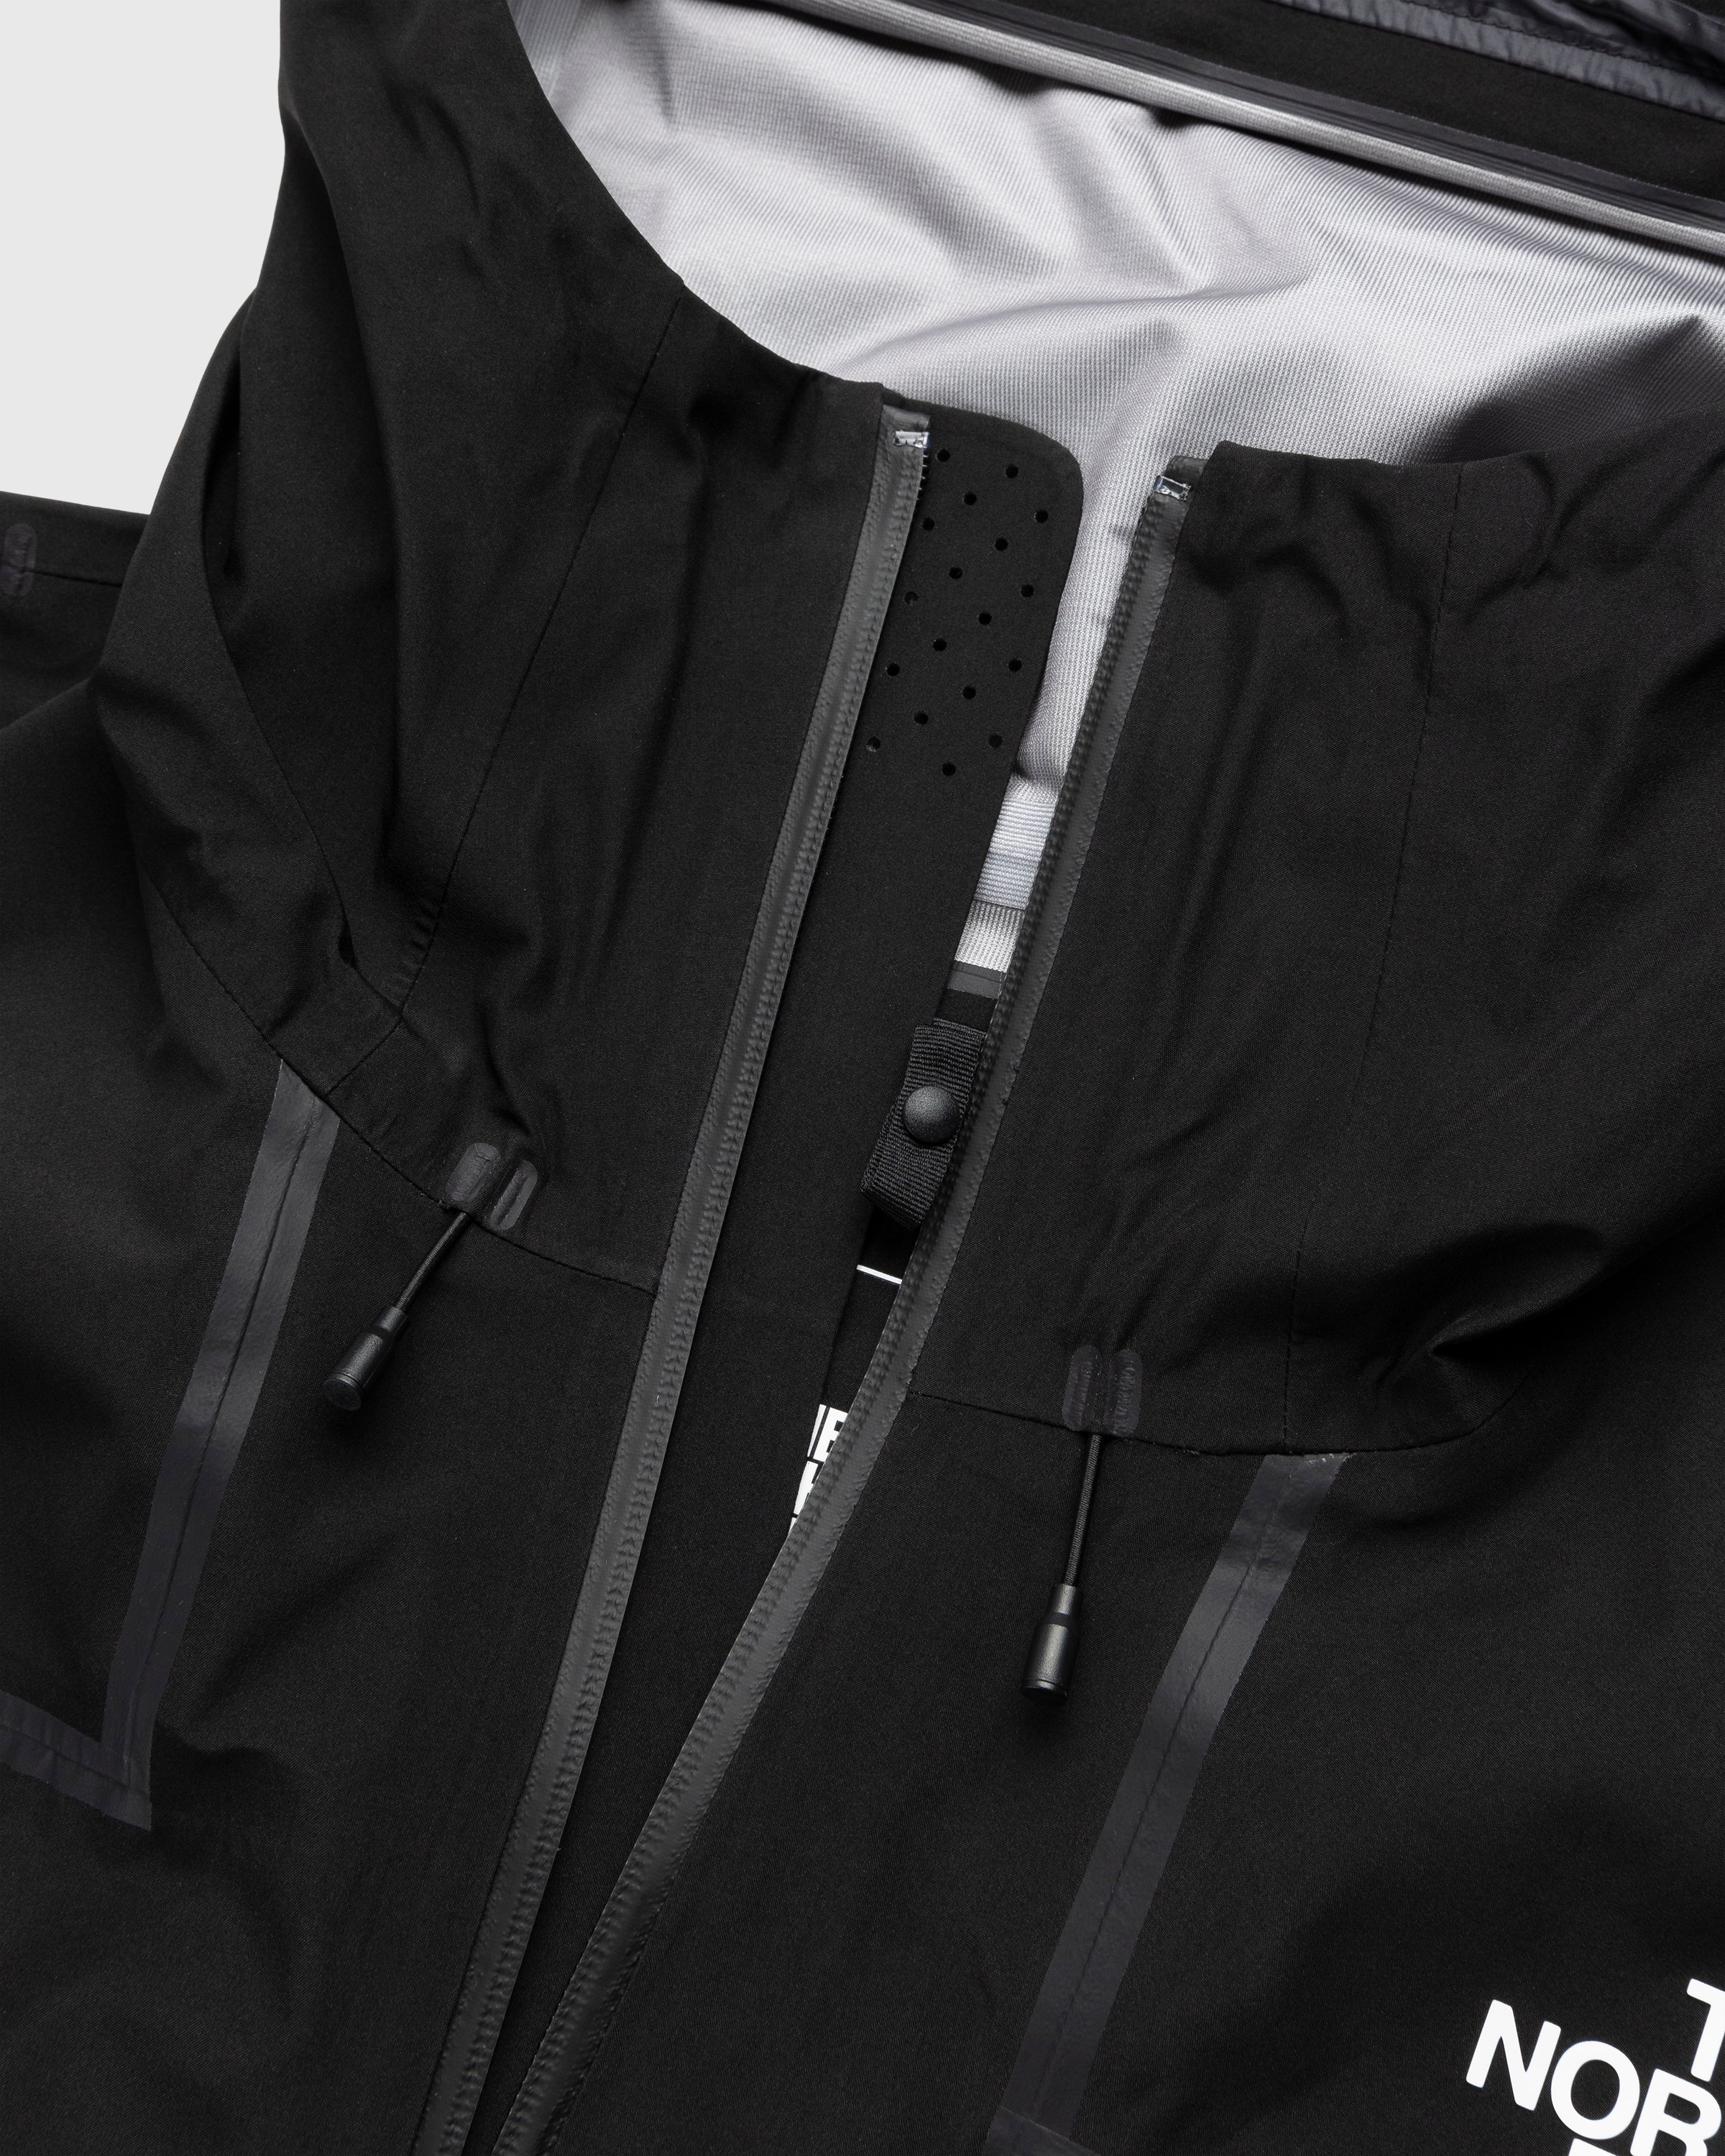 The North Face - RMST Mountain Light Futurelight Triclimate Jacket Black - Clothing - Black - Image 4